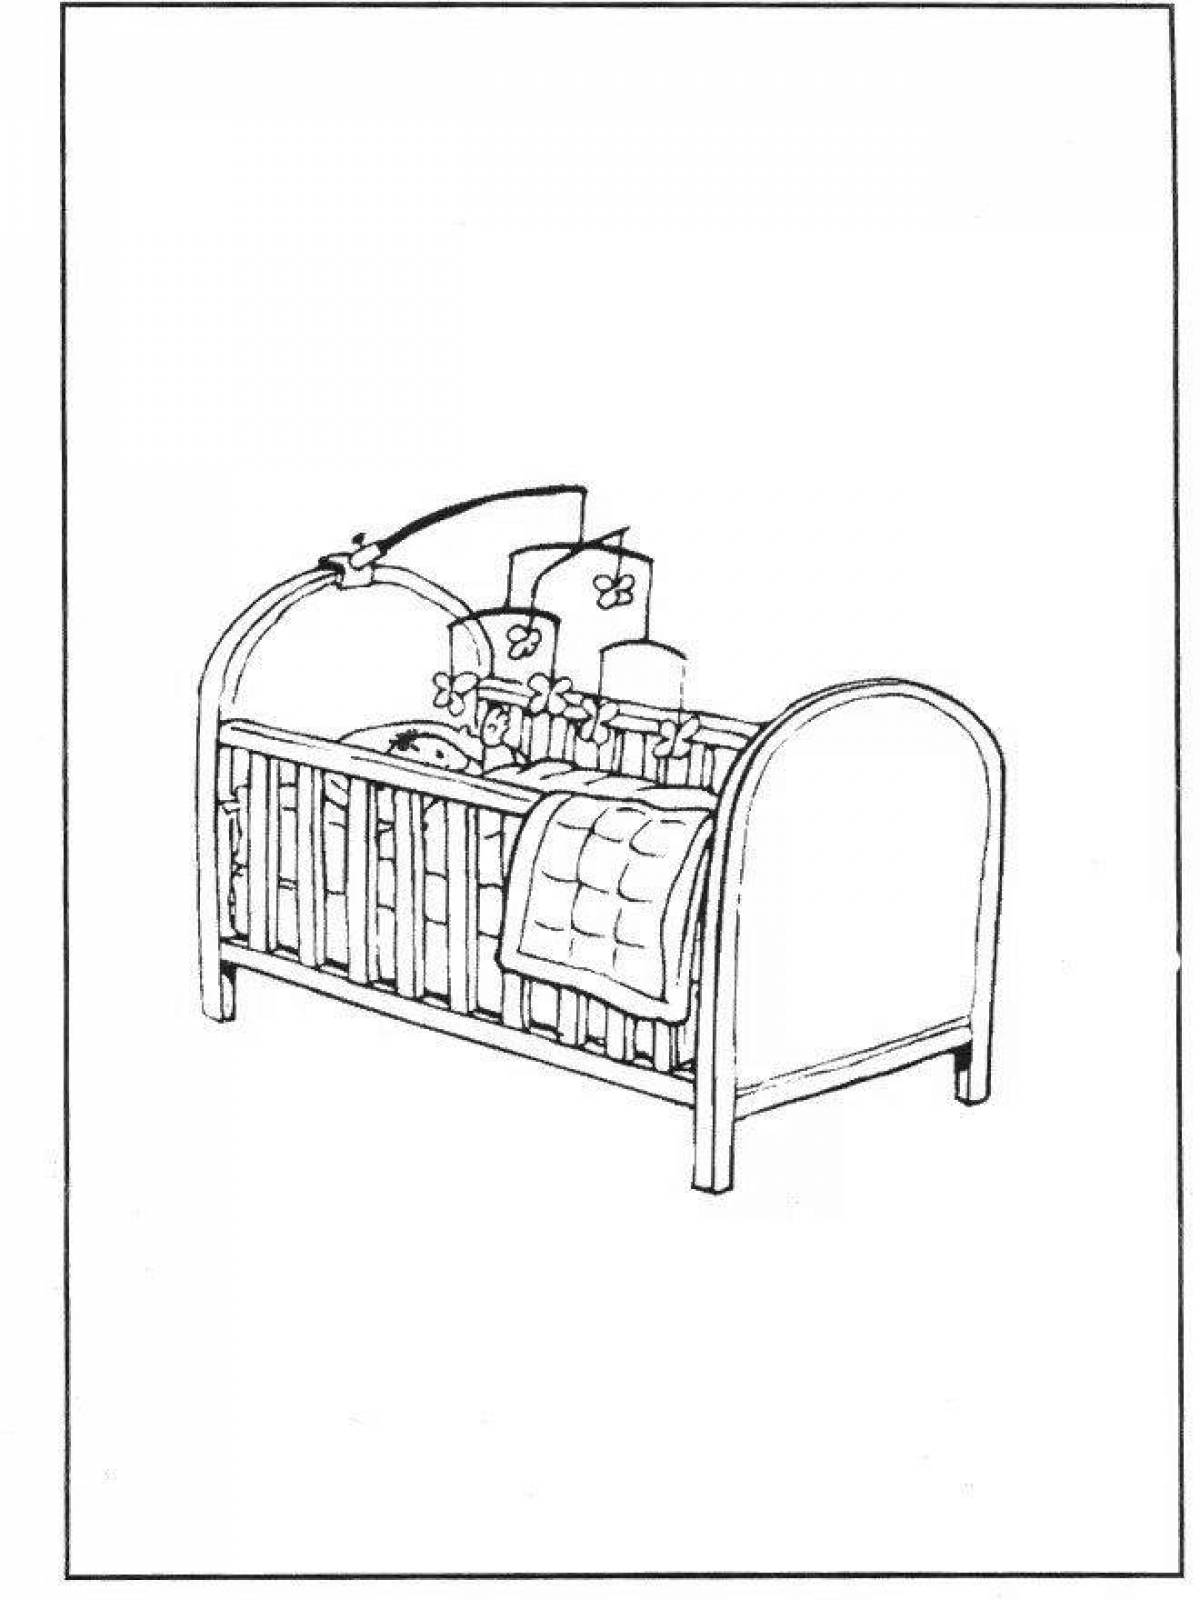 Coloring page joyful doll with a bed